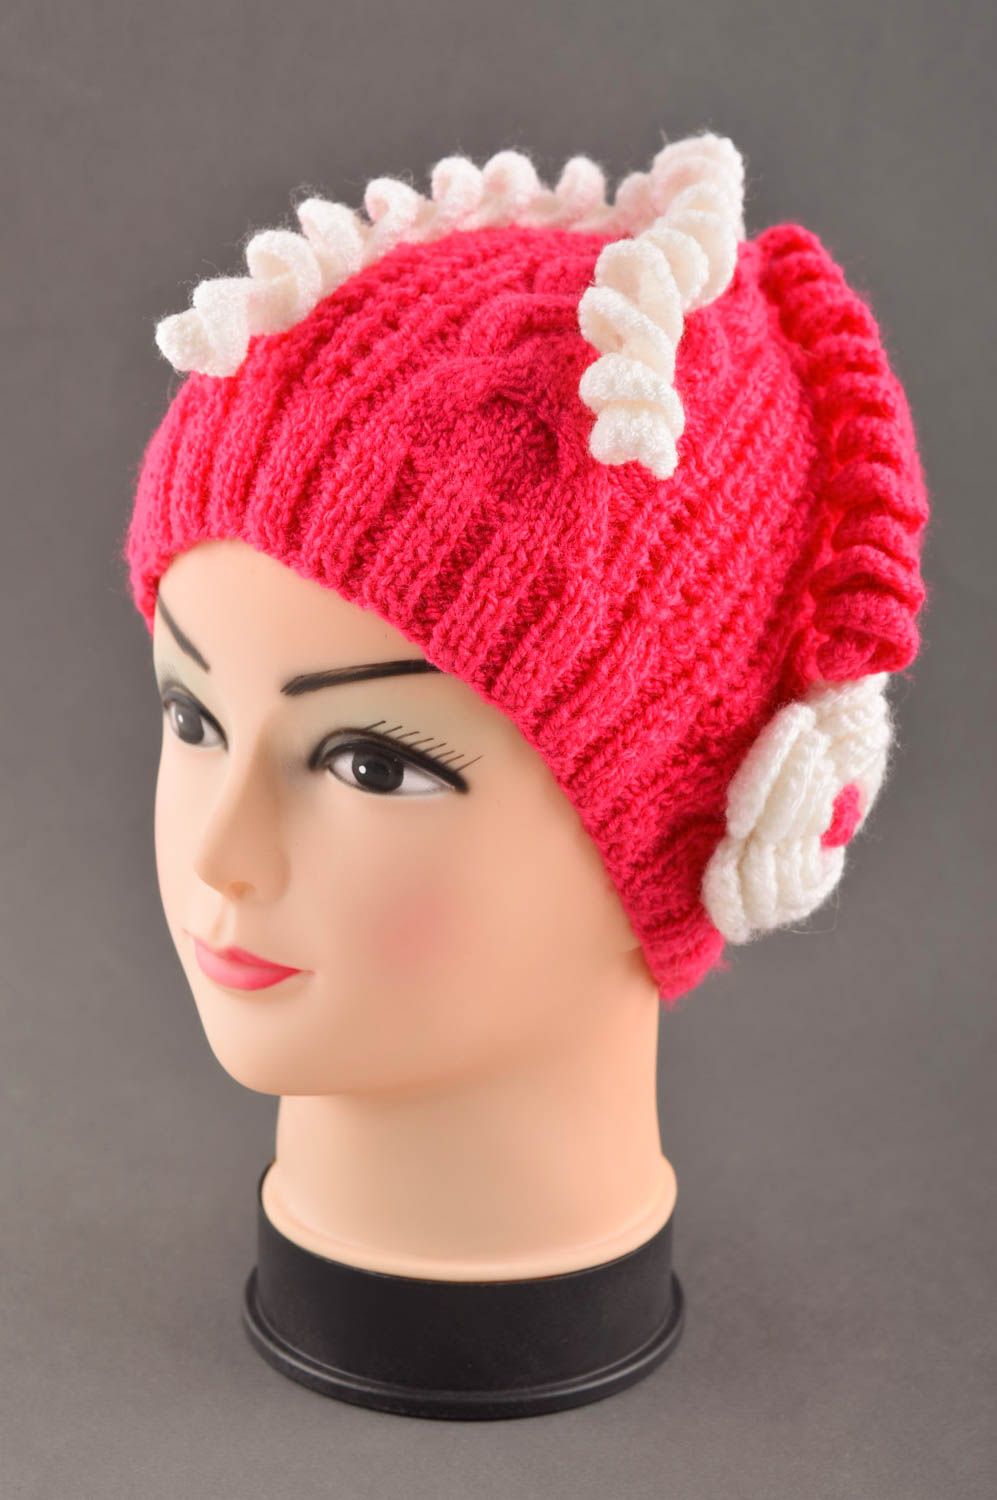 Handmade crocheted hat for babies red hat for girls stylish baby accessories photo 1